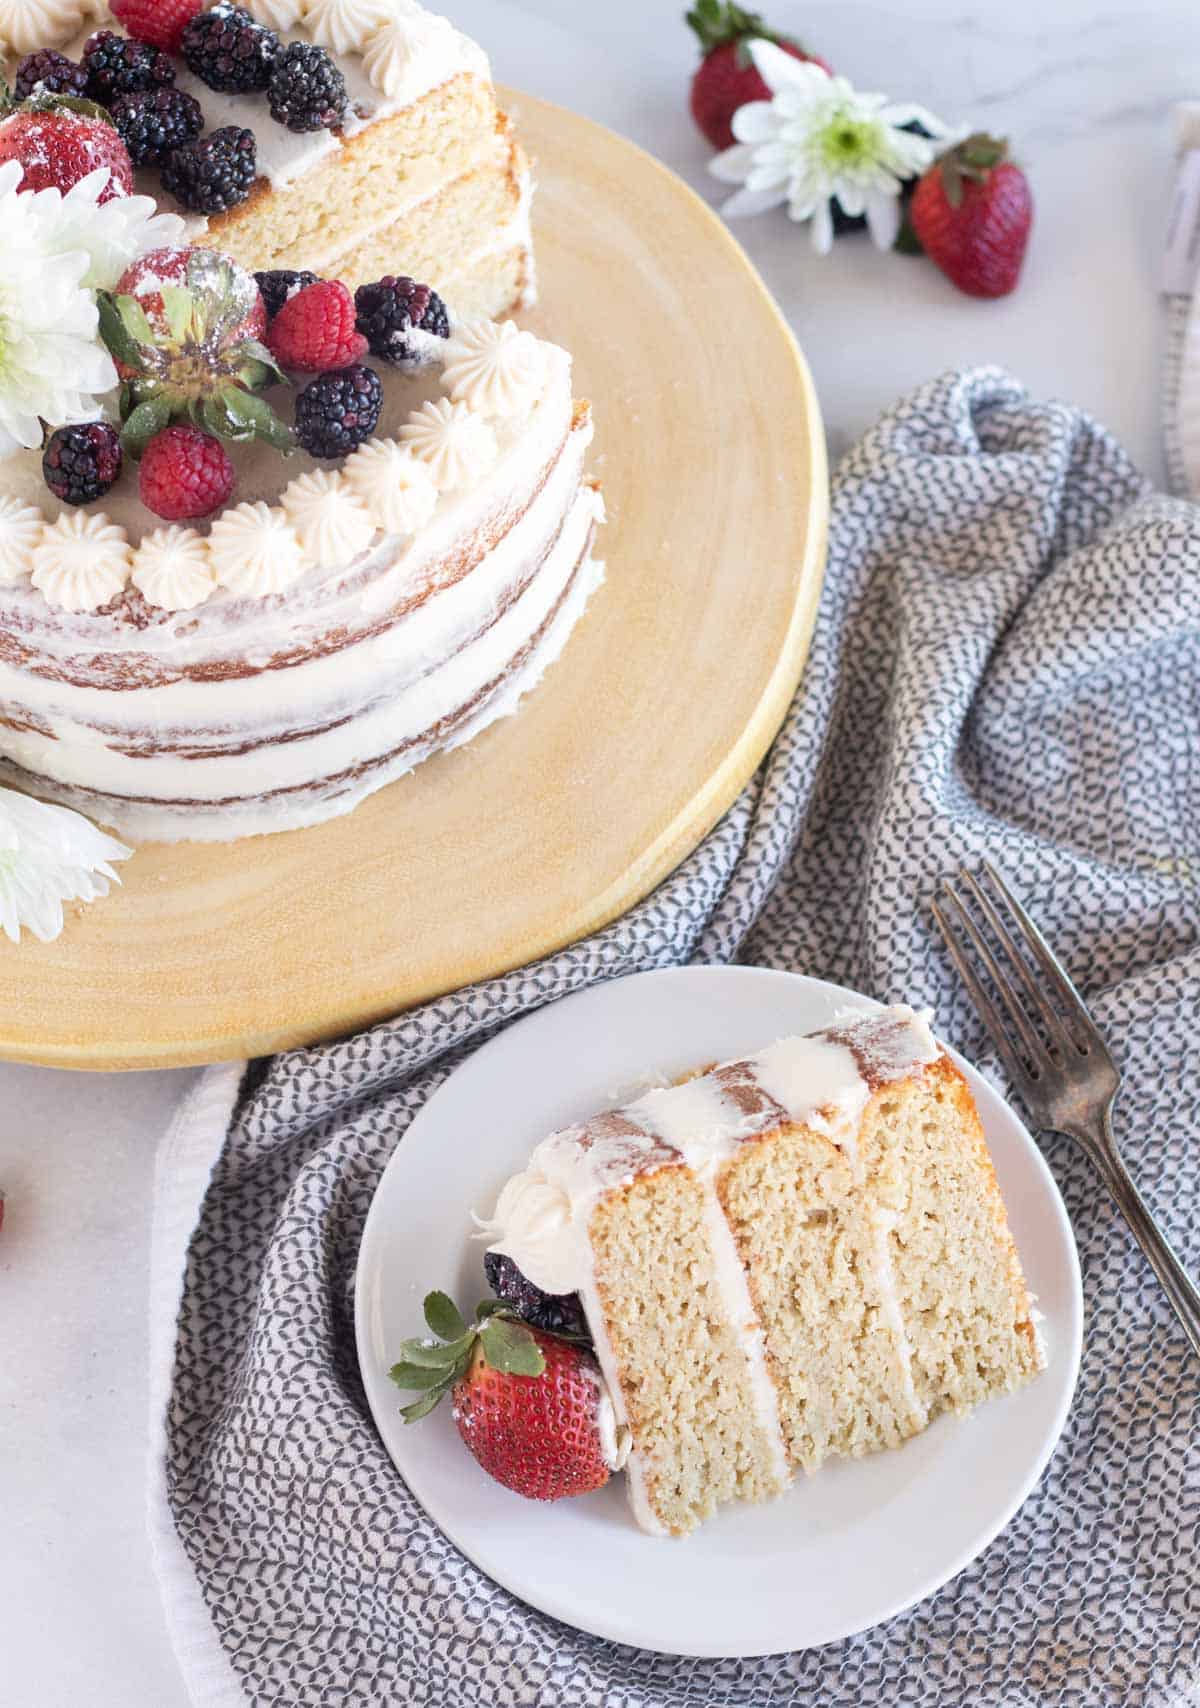 slice of cake with berries on a plate next to cake on stand